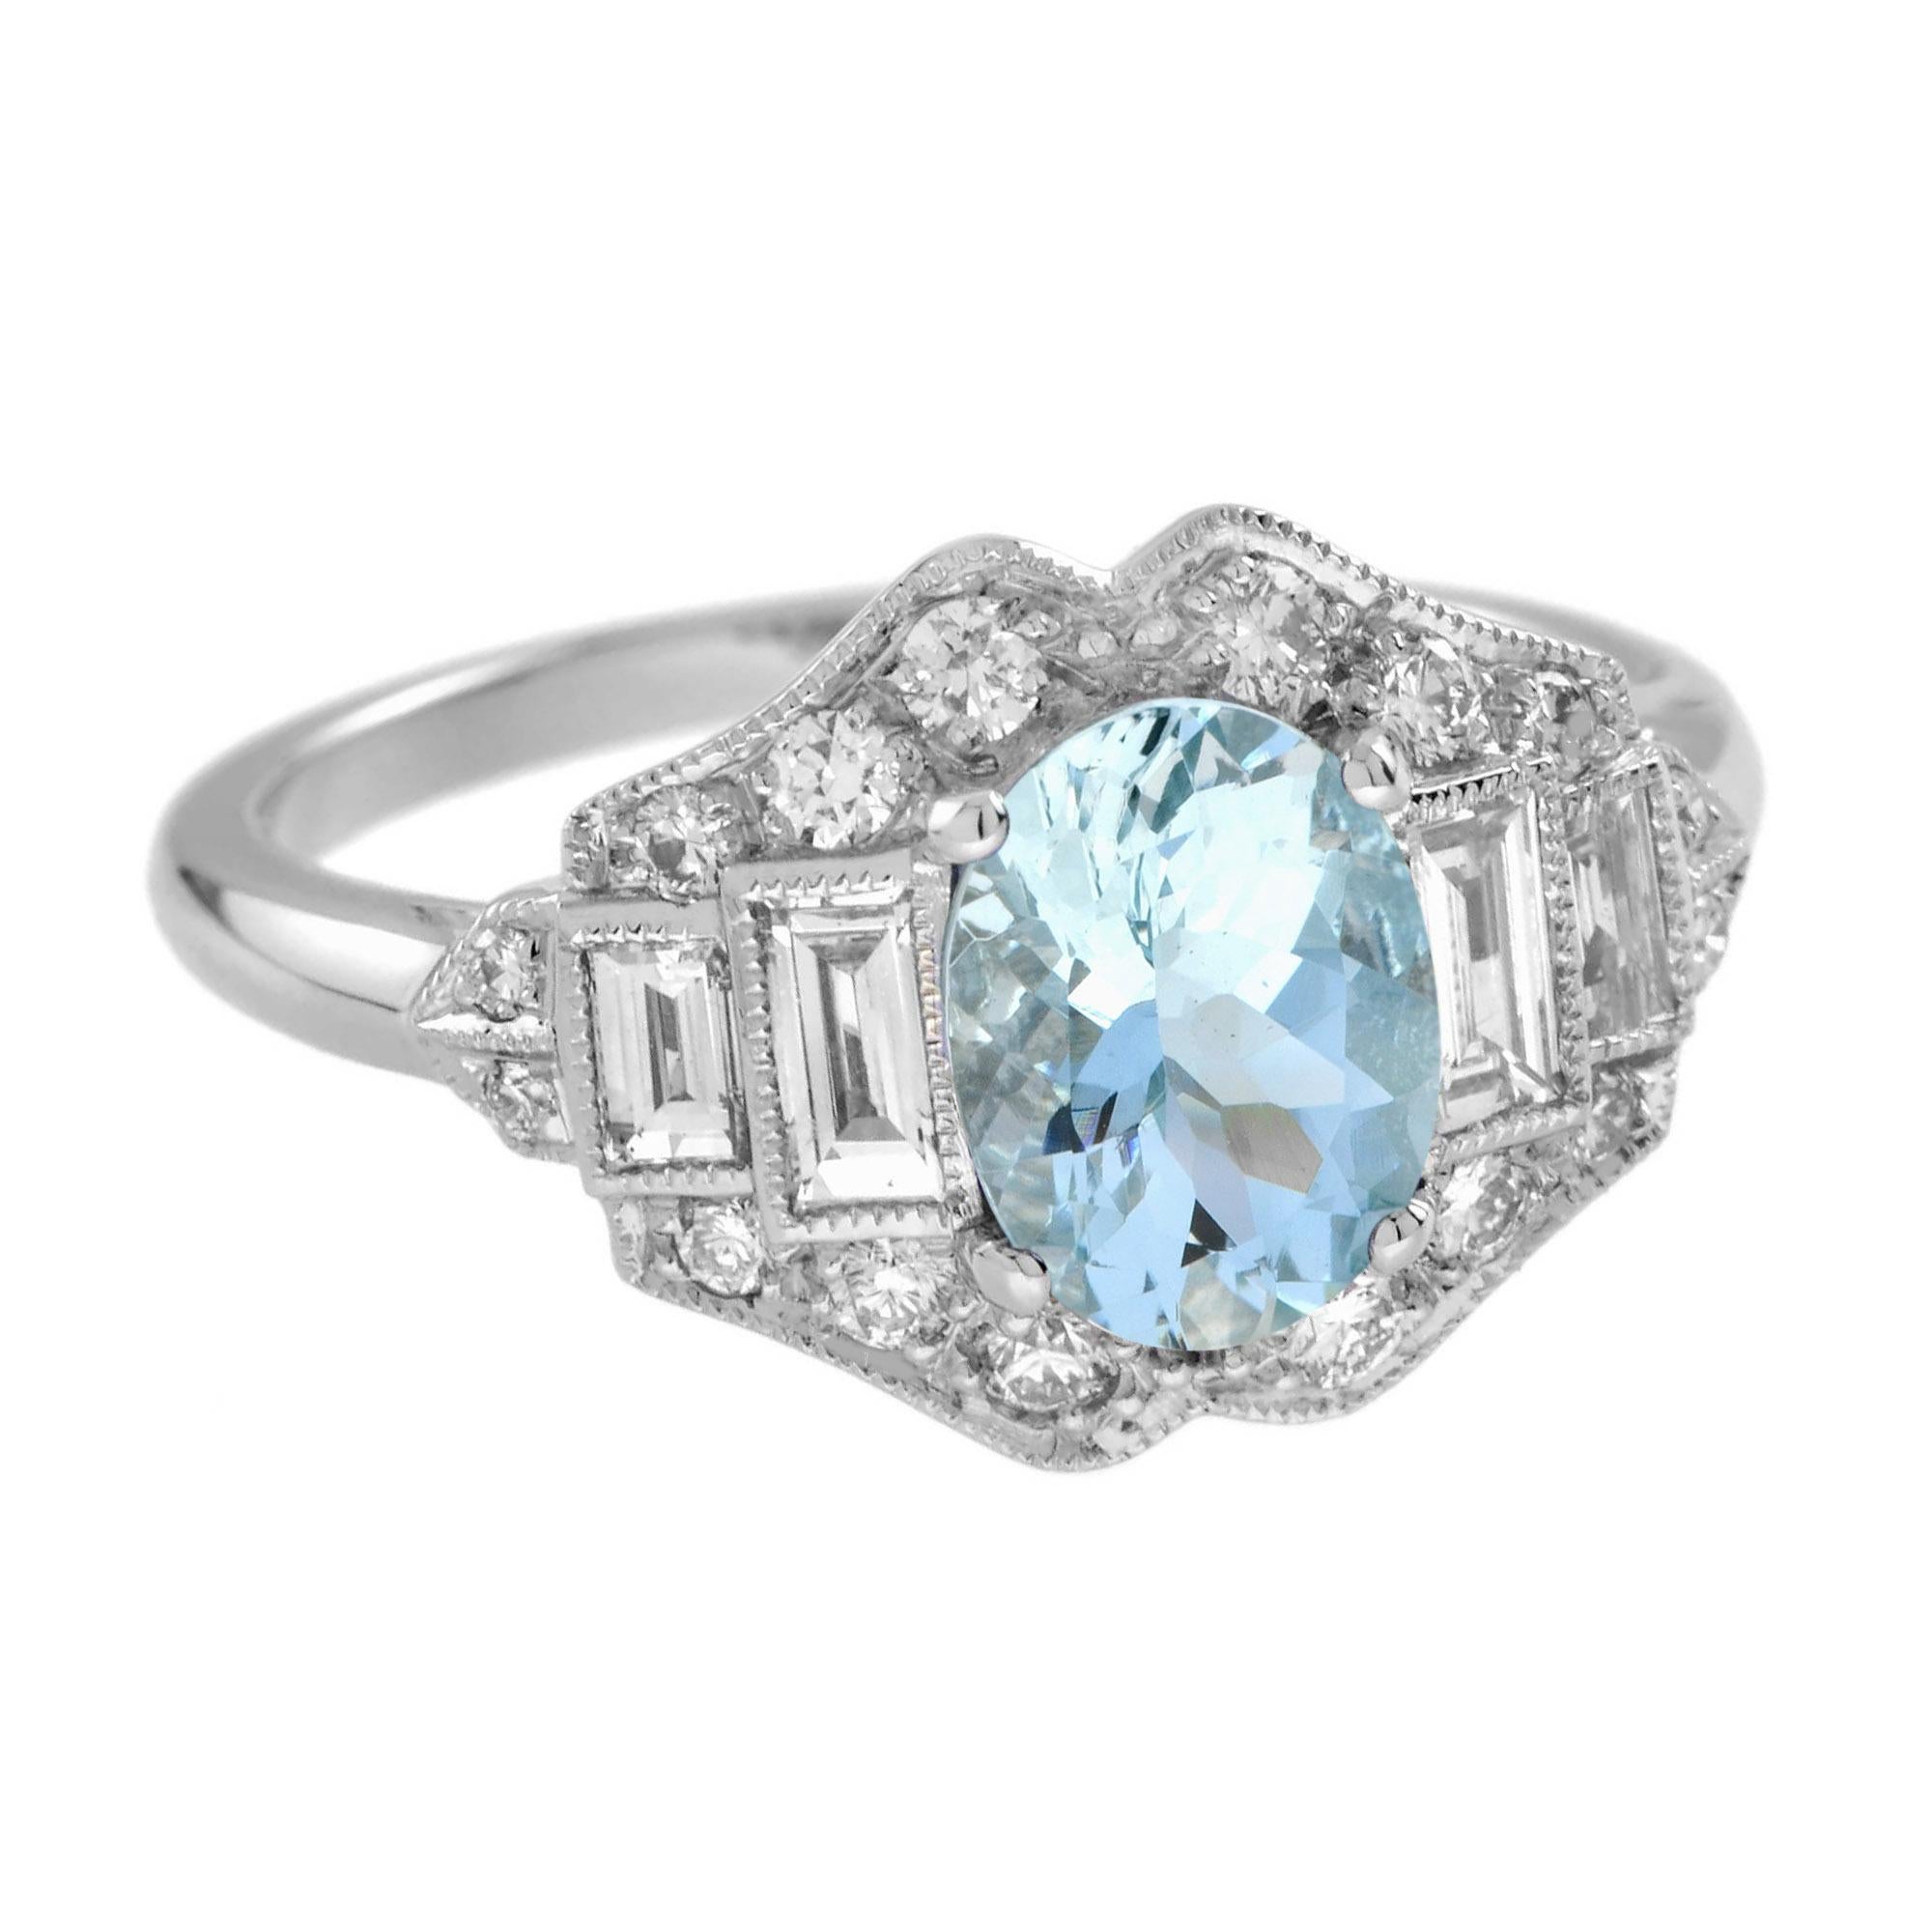 For Sale:  1.50 Ct. Aquamarine and Diamond Art Deco Style Engagement Ring in 18K Gold 3